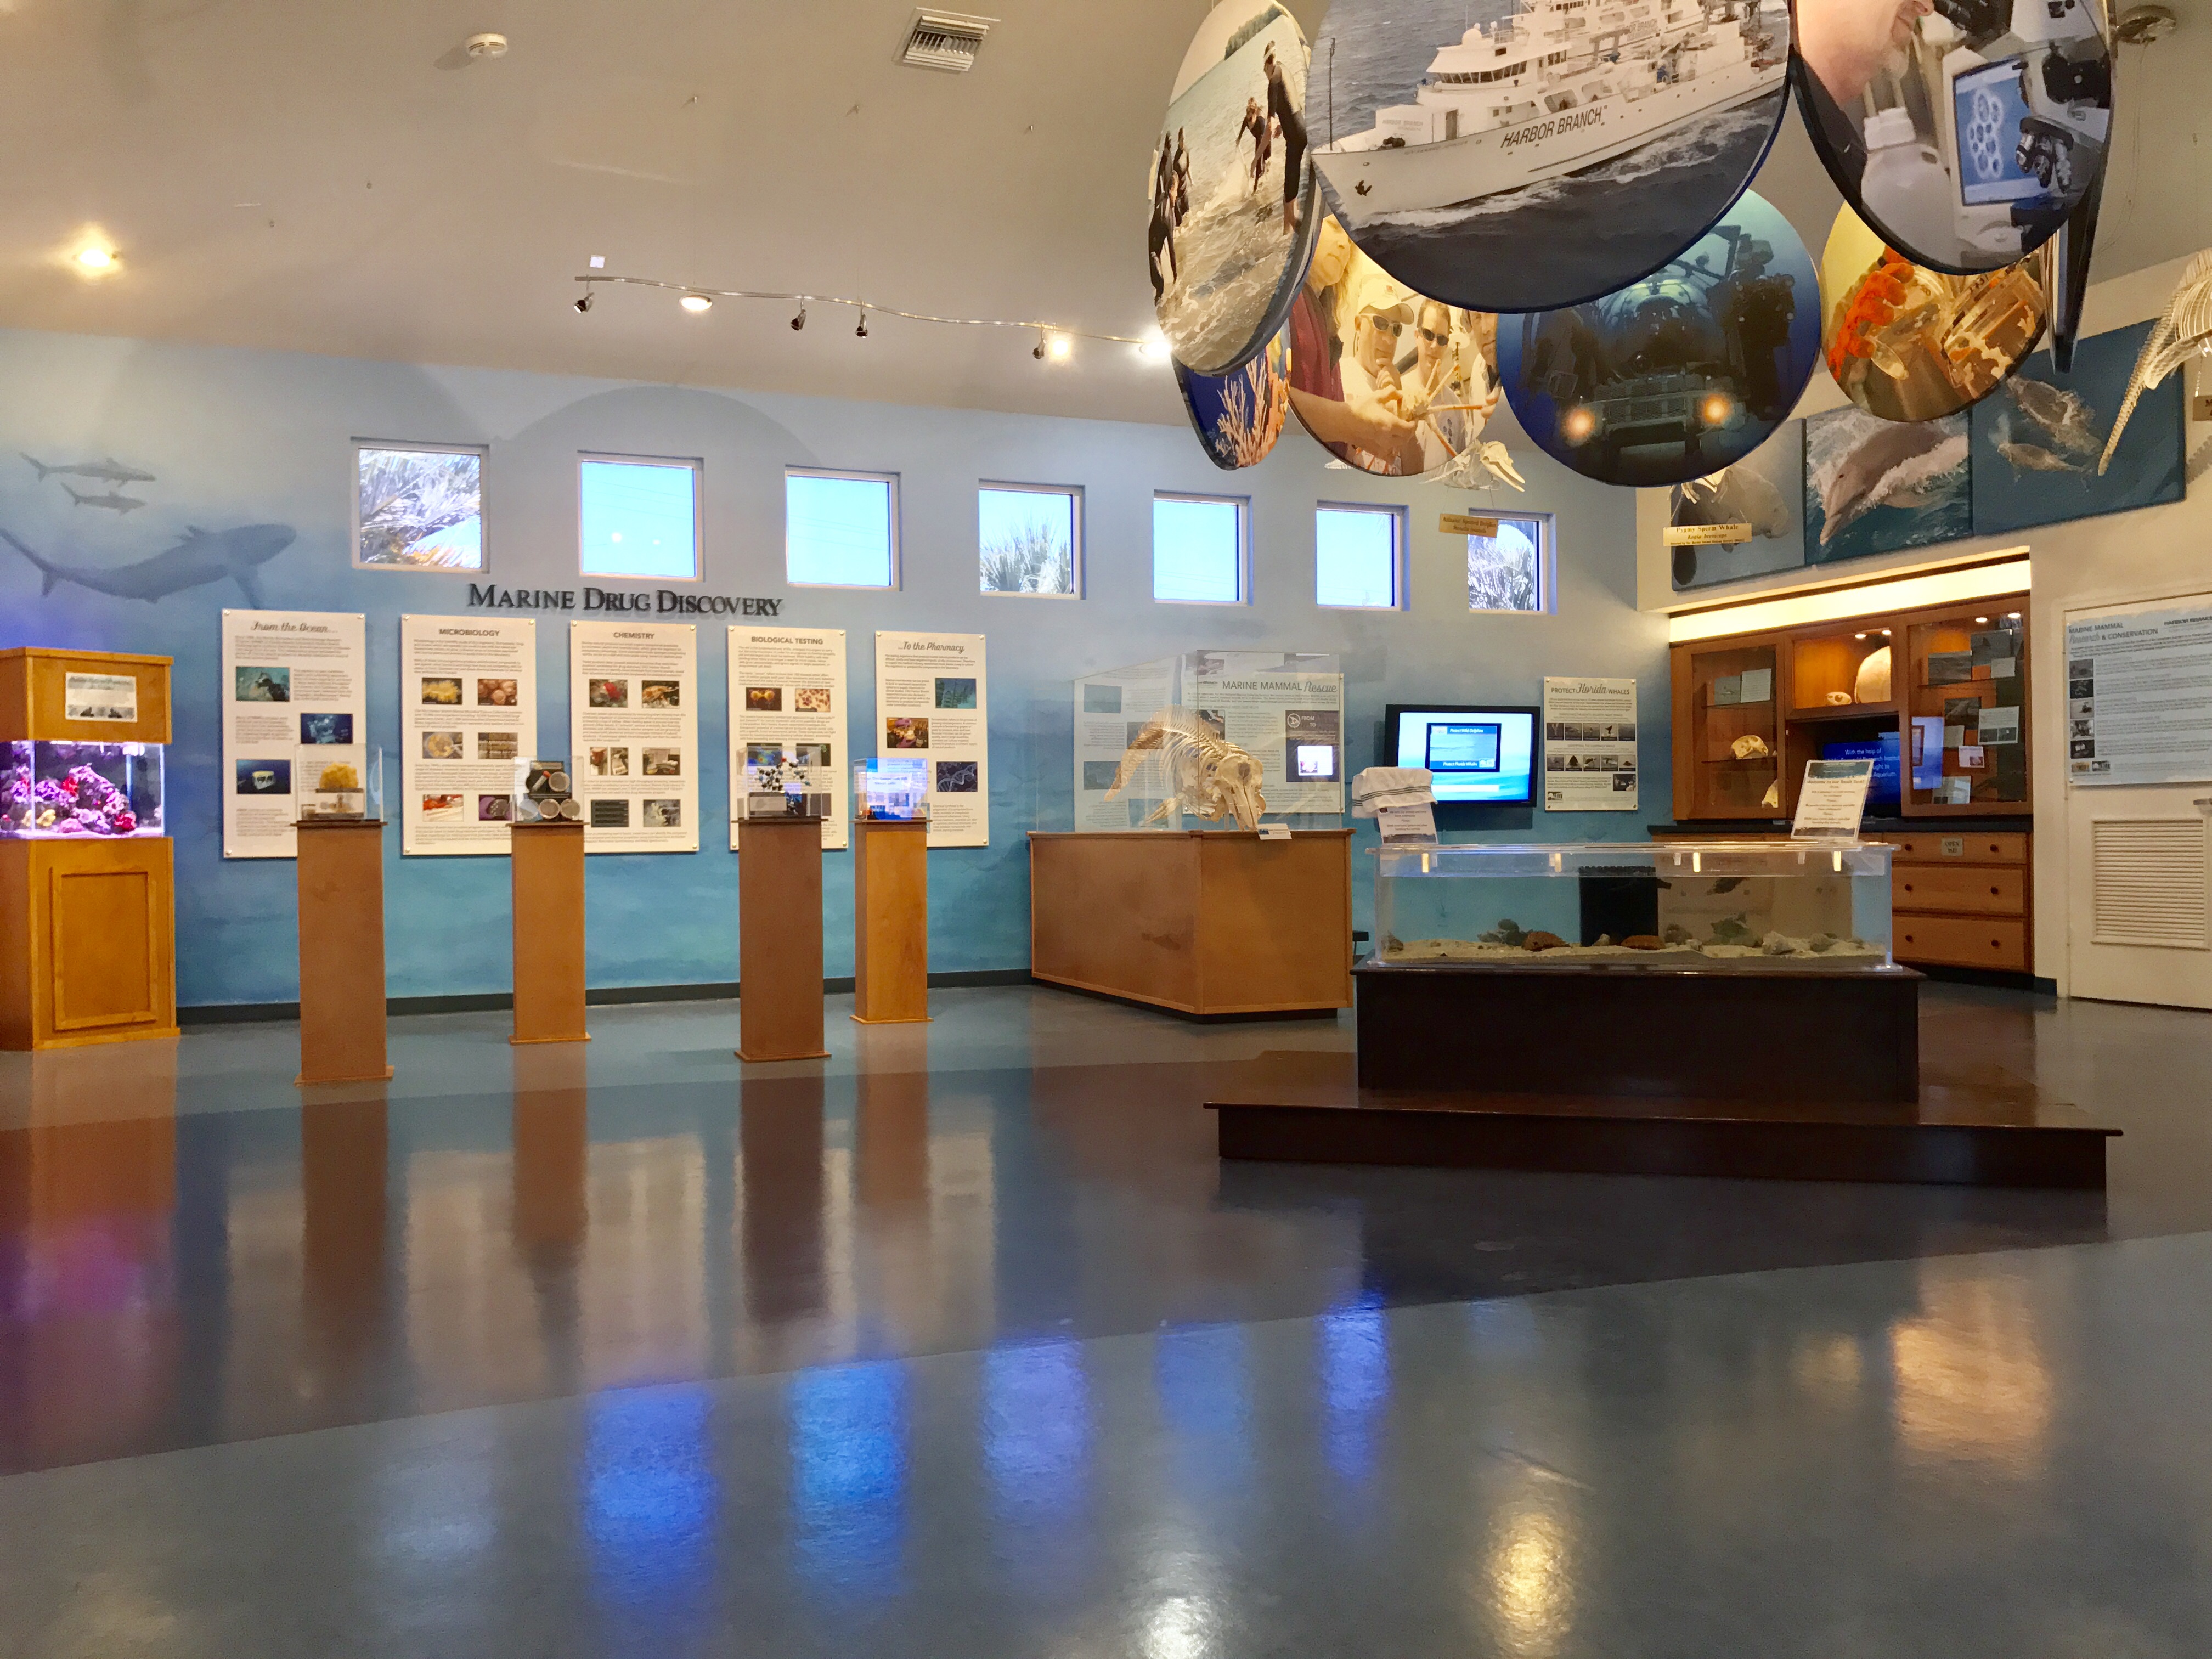 FAU Harbor Branch Ocean Discovery Visitors Center